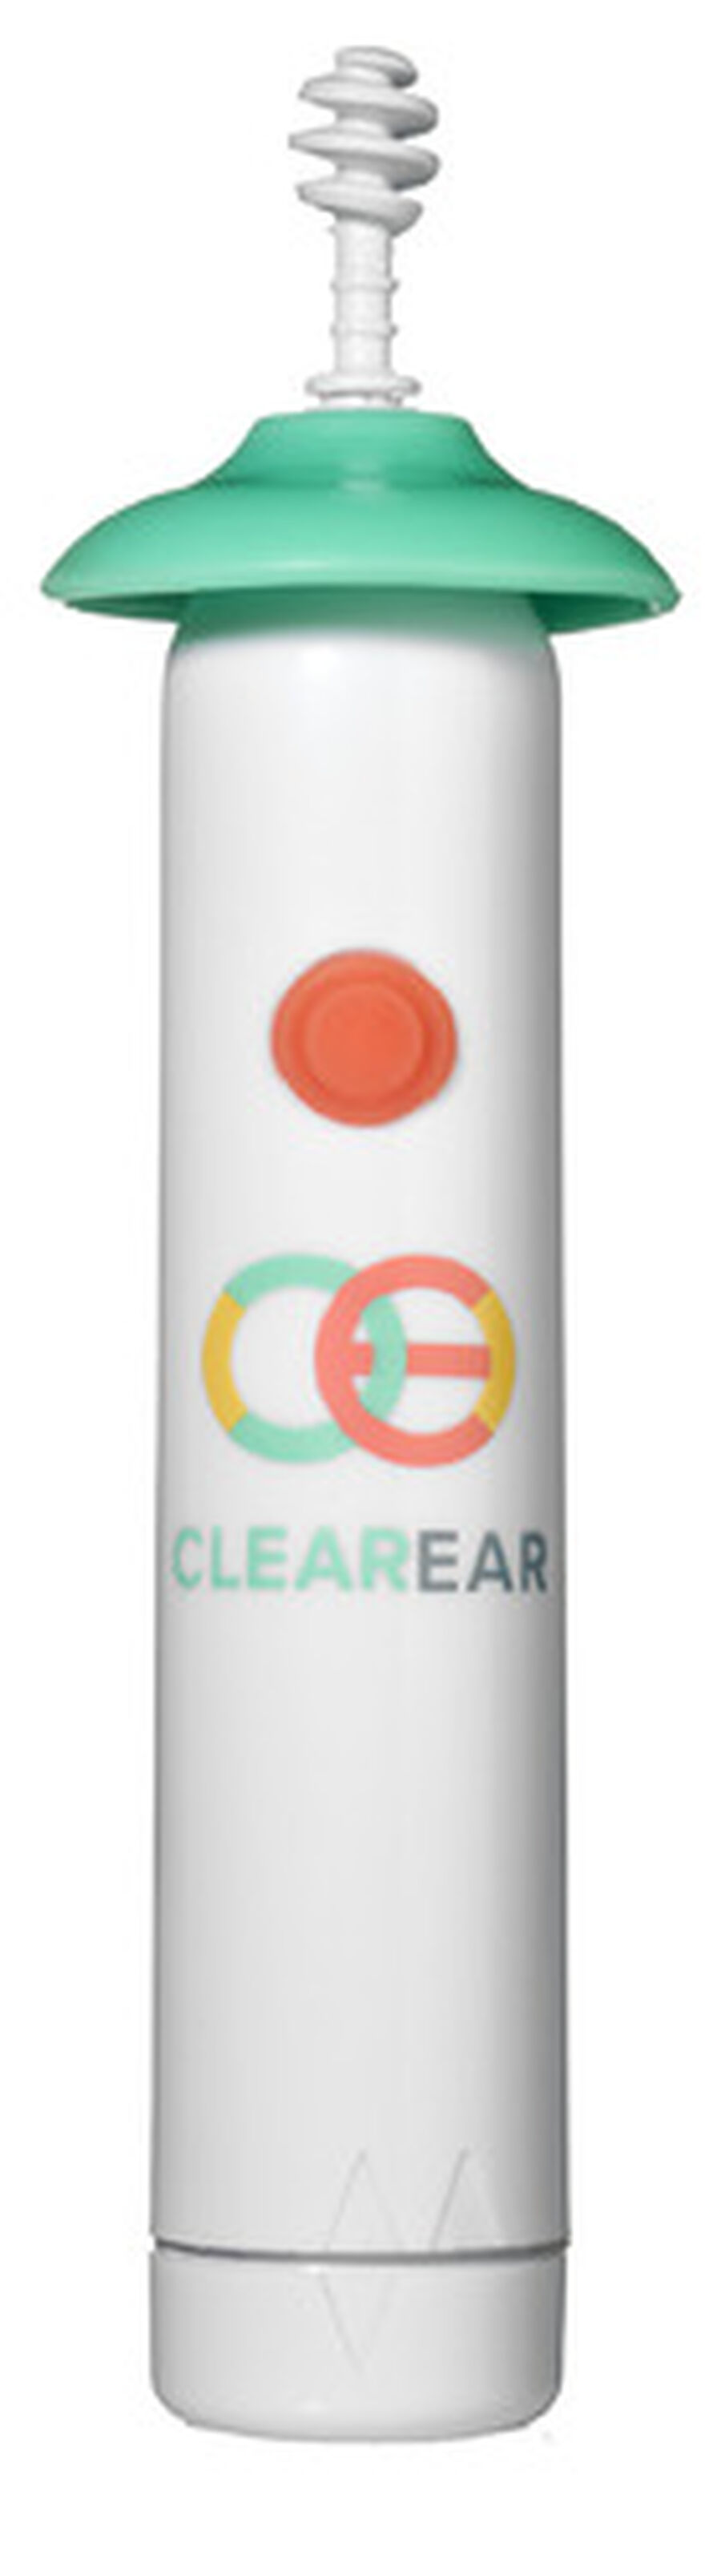 Clear Ear OTO-Tip Soft Spiral Earwax Cleaner, , large image number 2